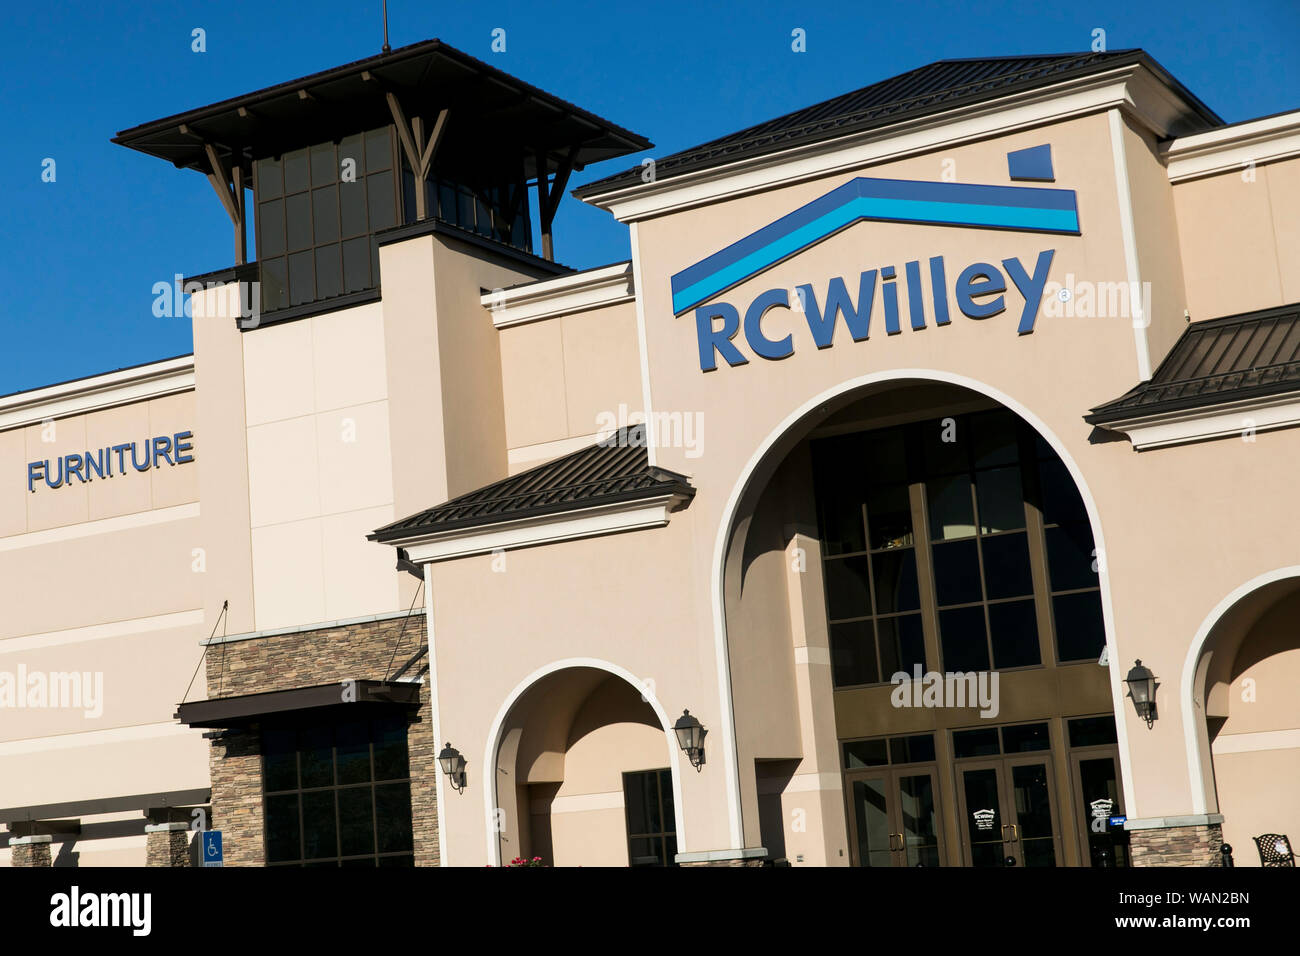 A logo sign outside of a RC Willey Home Furnishings retail store location in Orem, Utah on July 29, 2019. Stock Photo